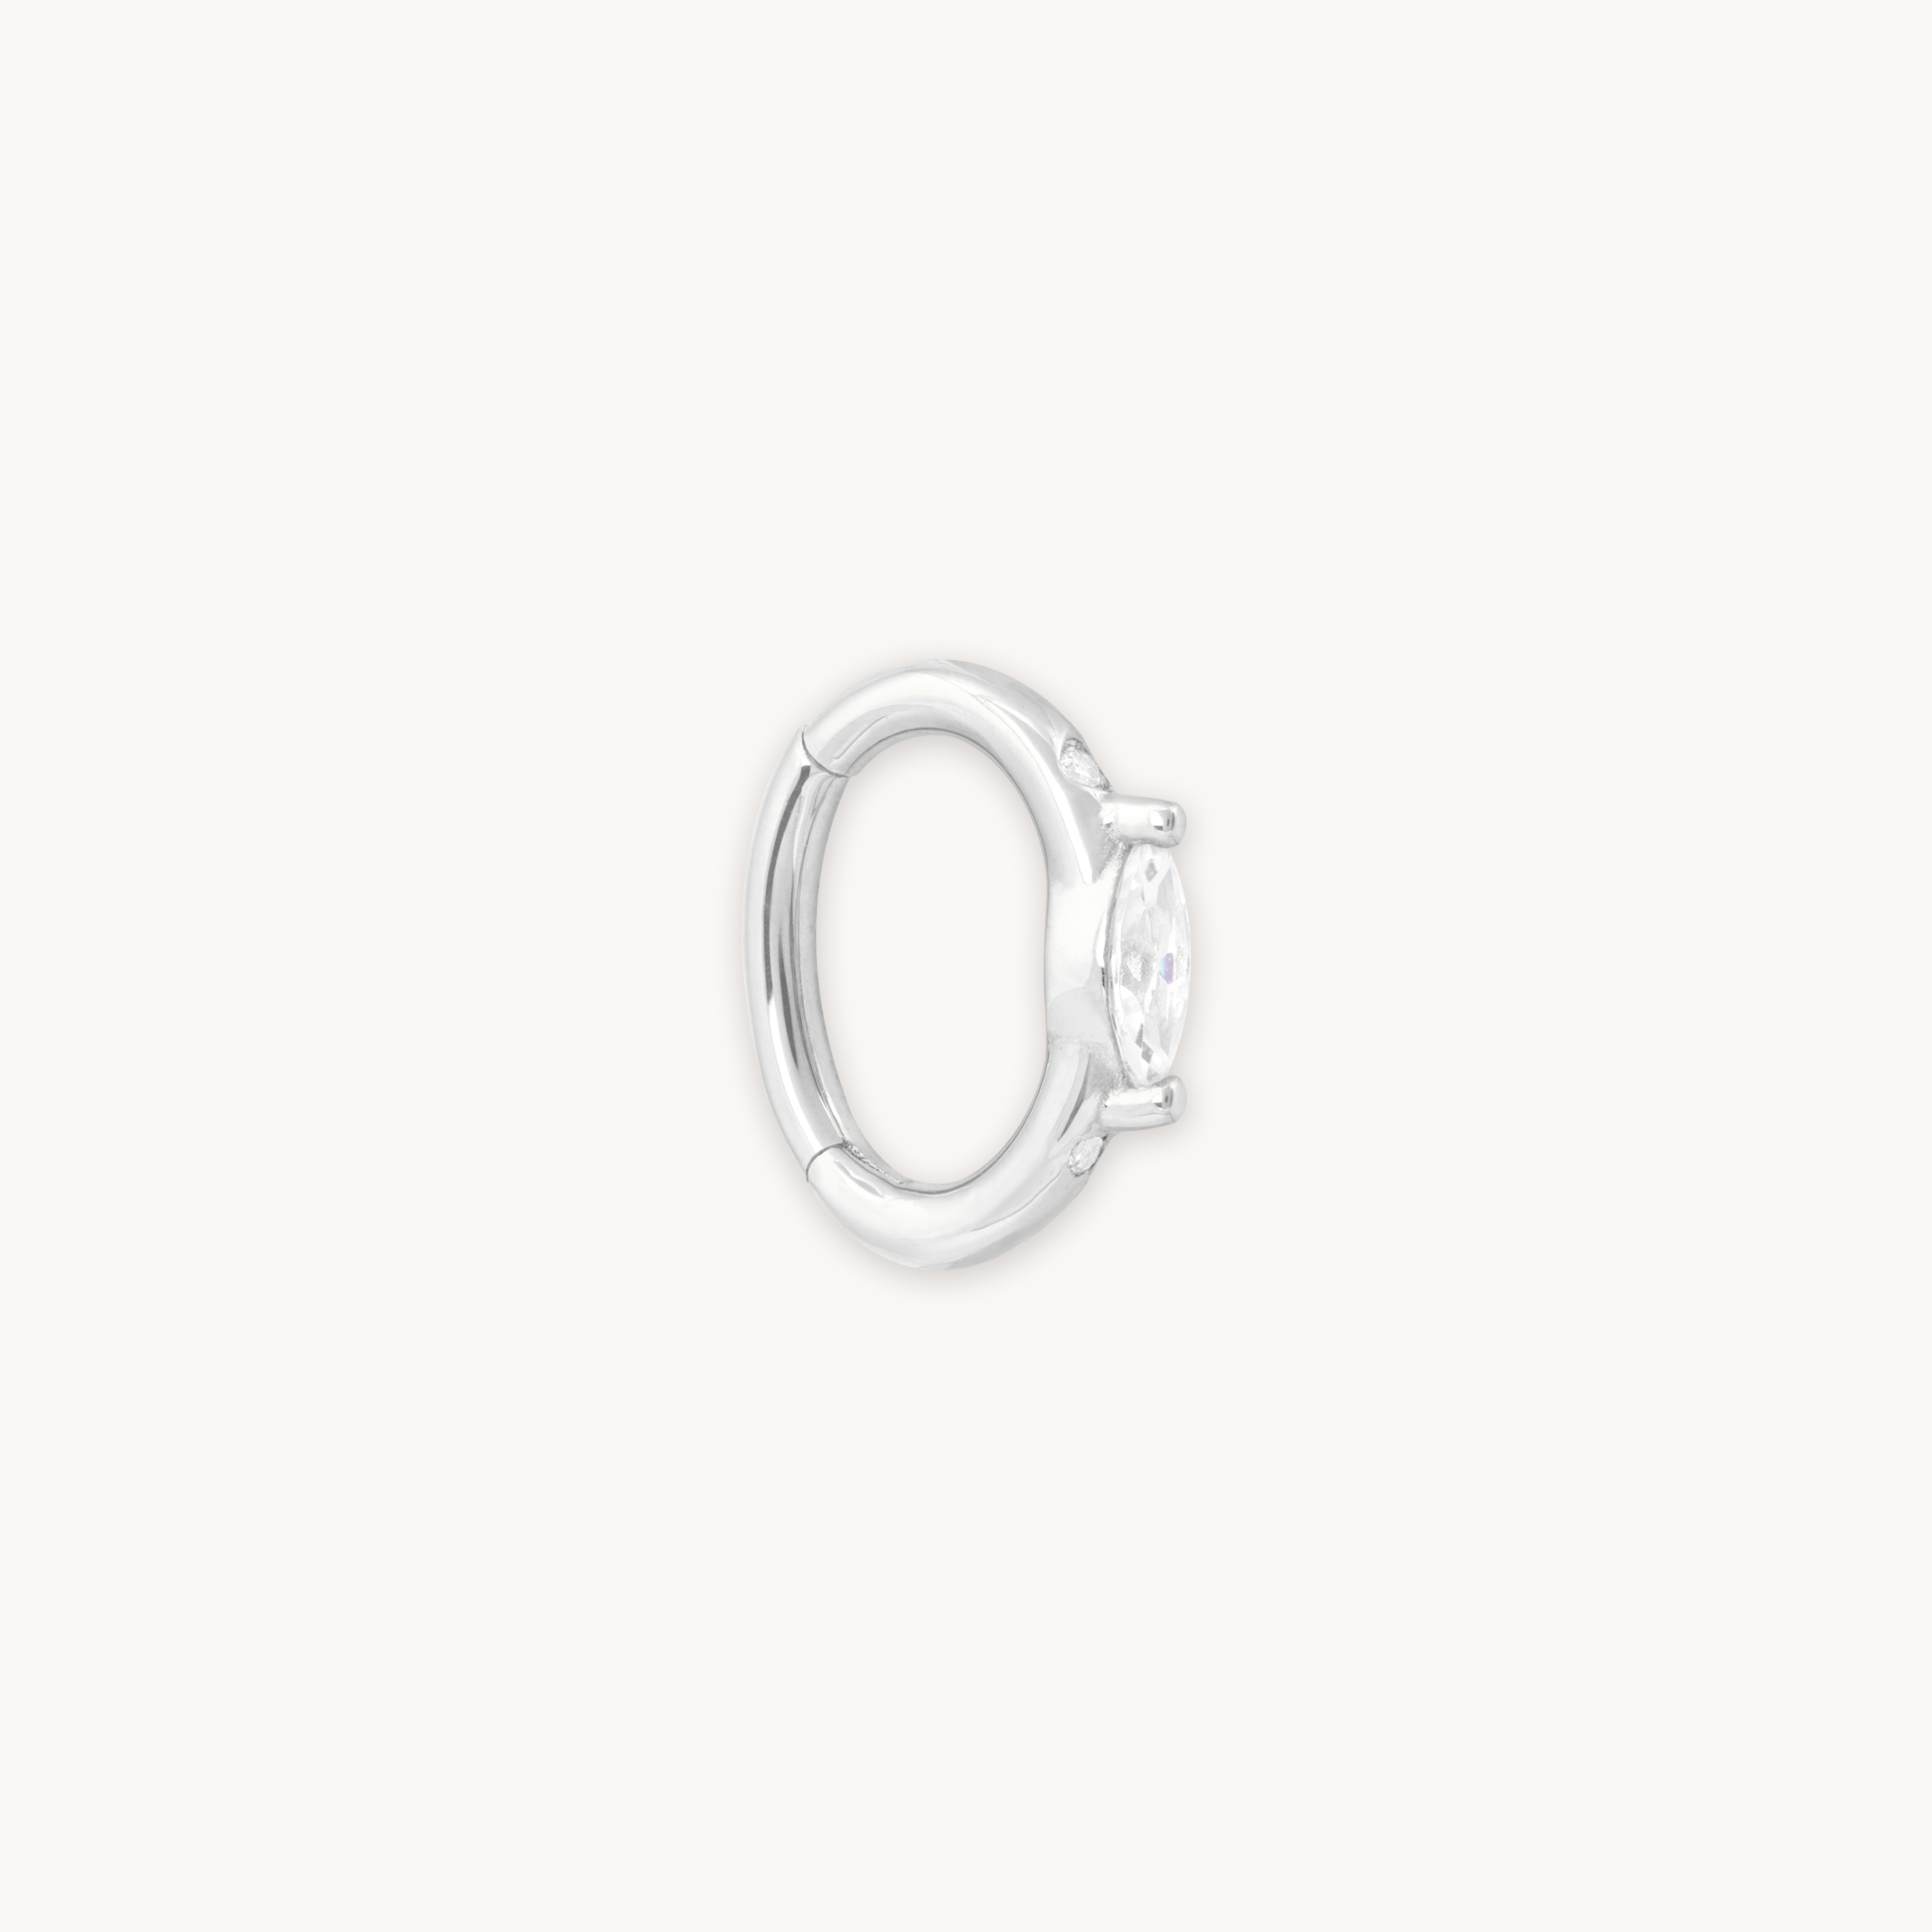 SOLID WHITE GOLD MARQUISE PIERCING HOOP CUT OUT